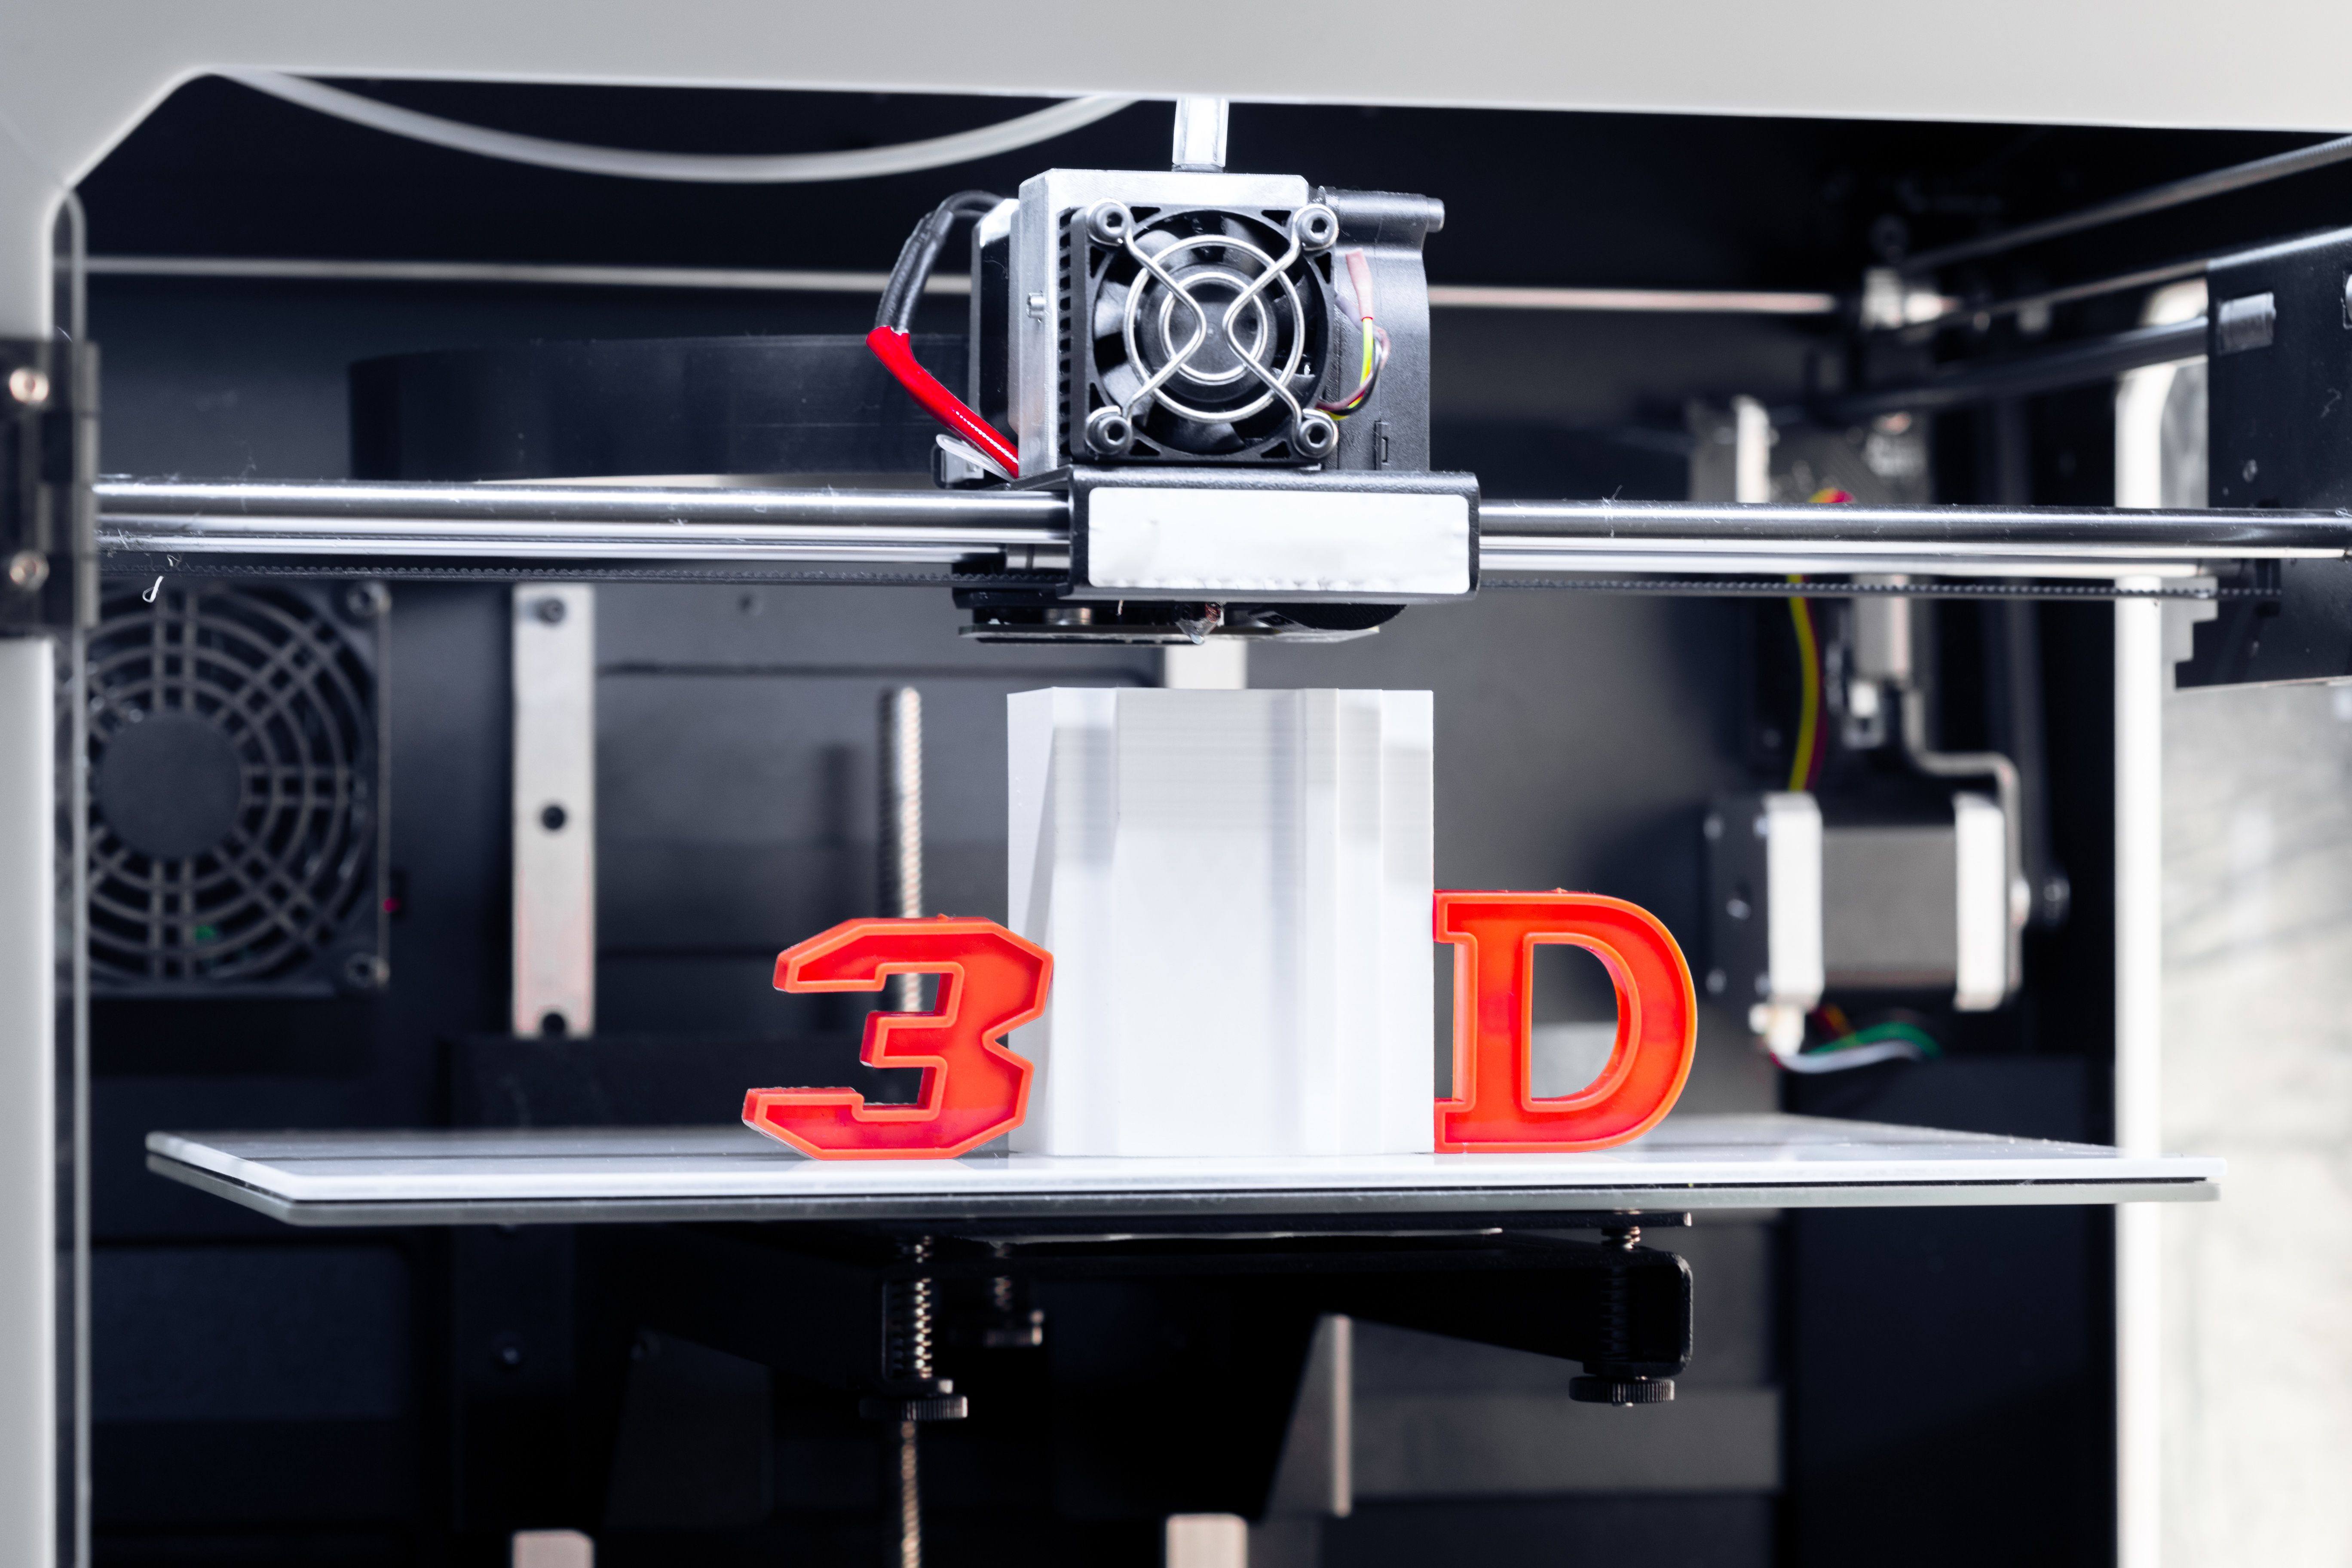 A 3D printer in action with letters 3D and D on both sides of a model being 3D printed in the build plate